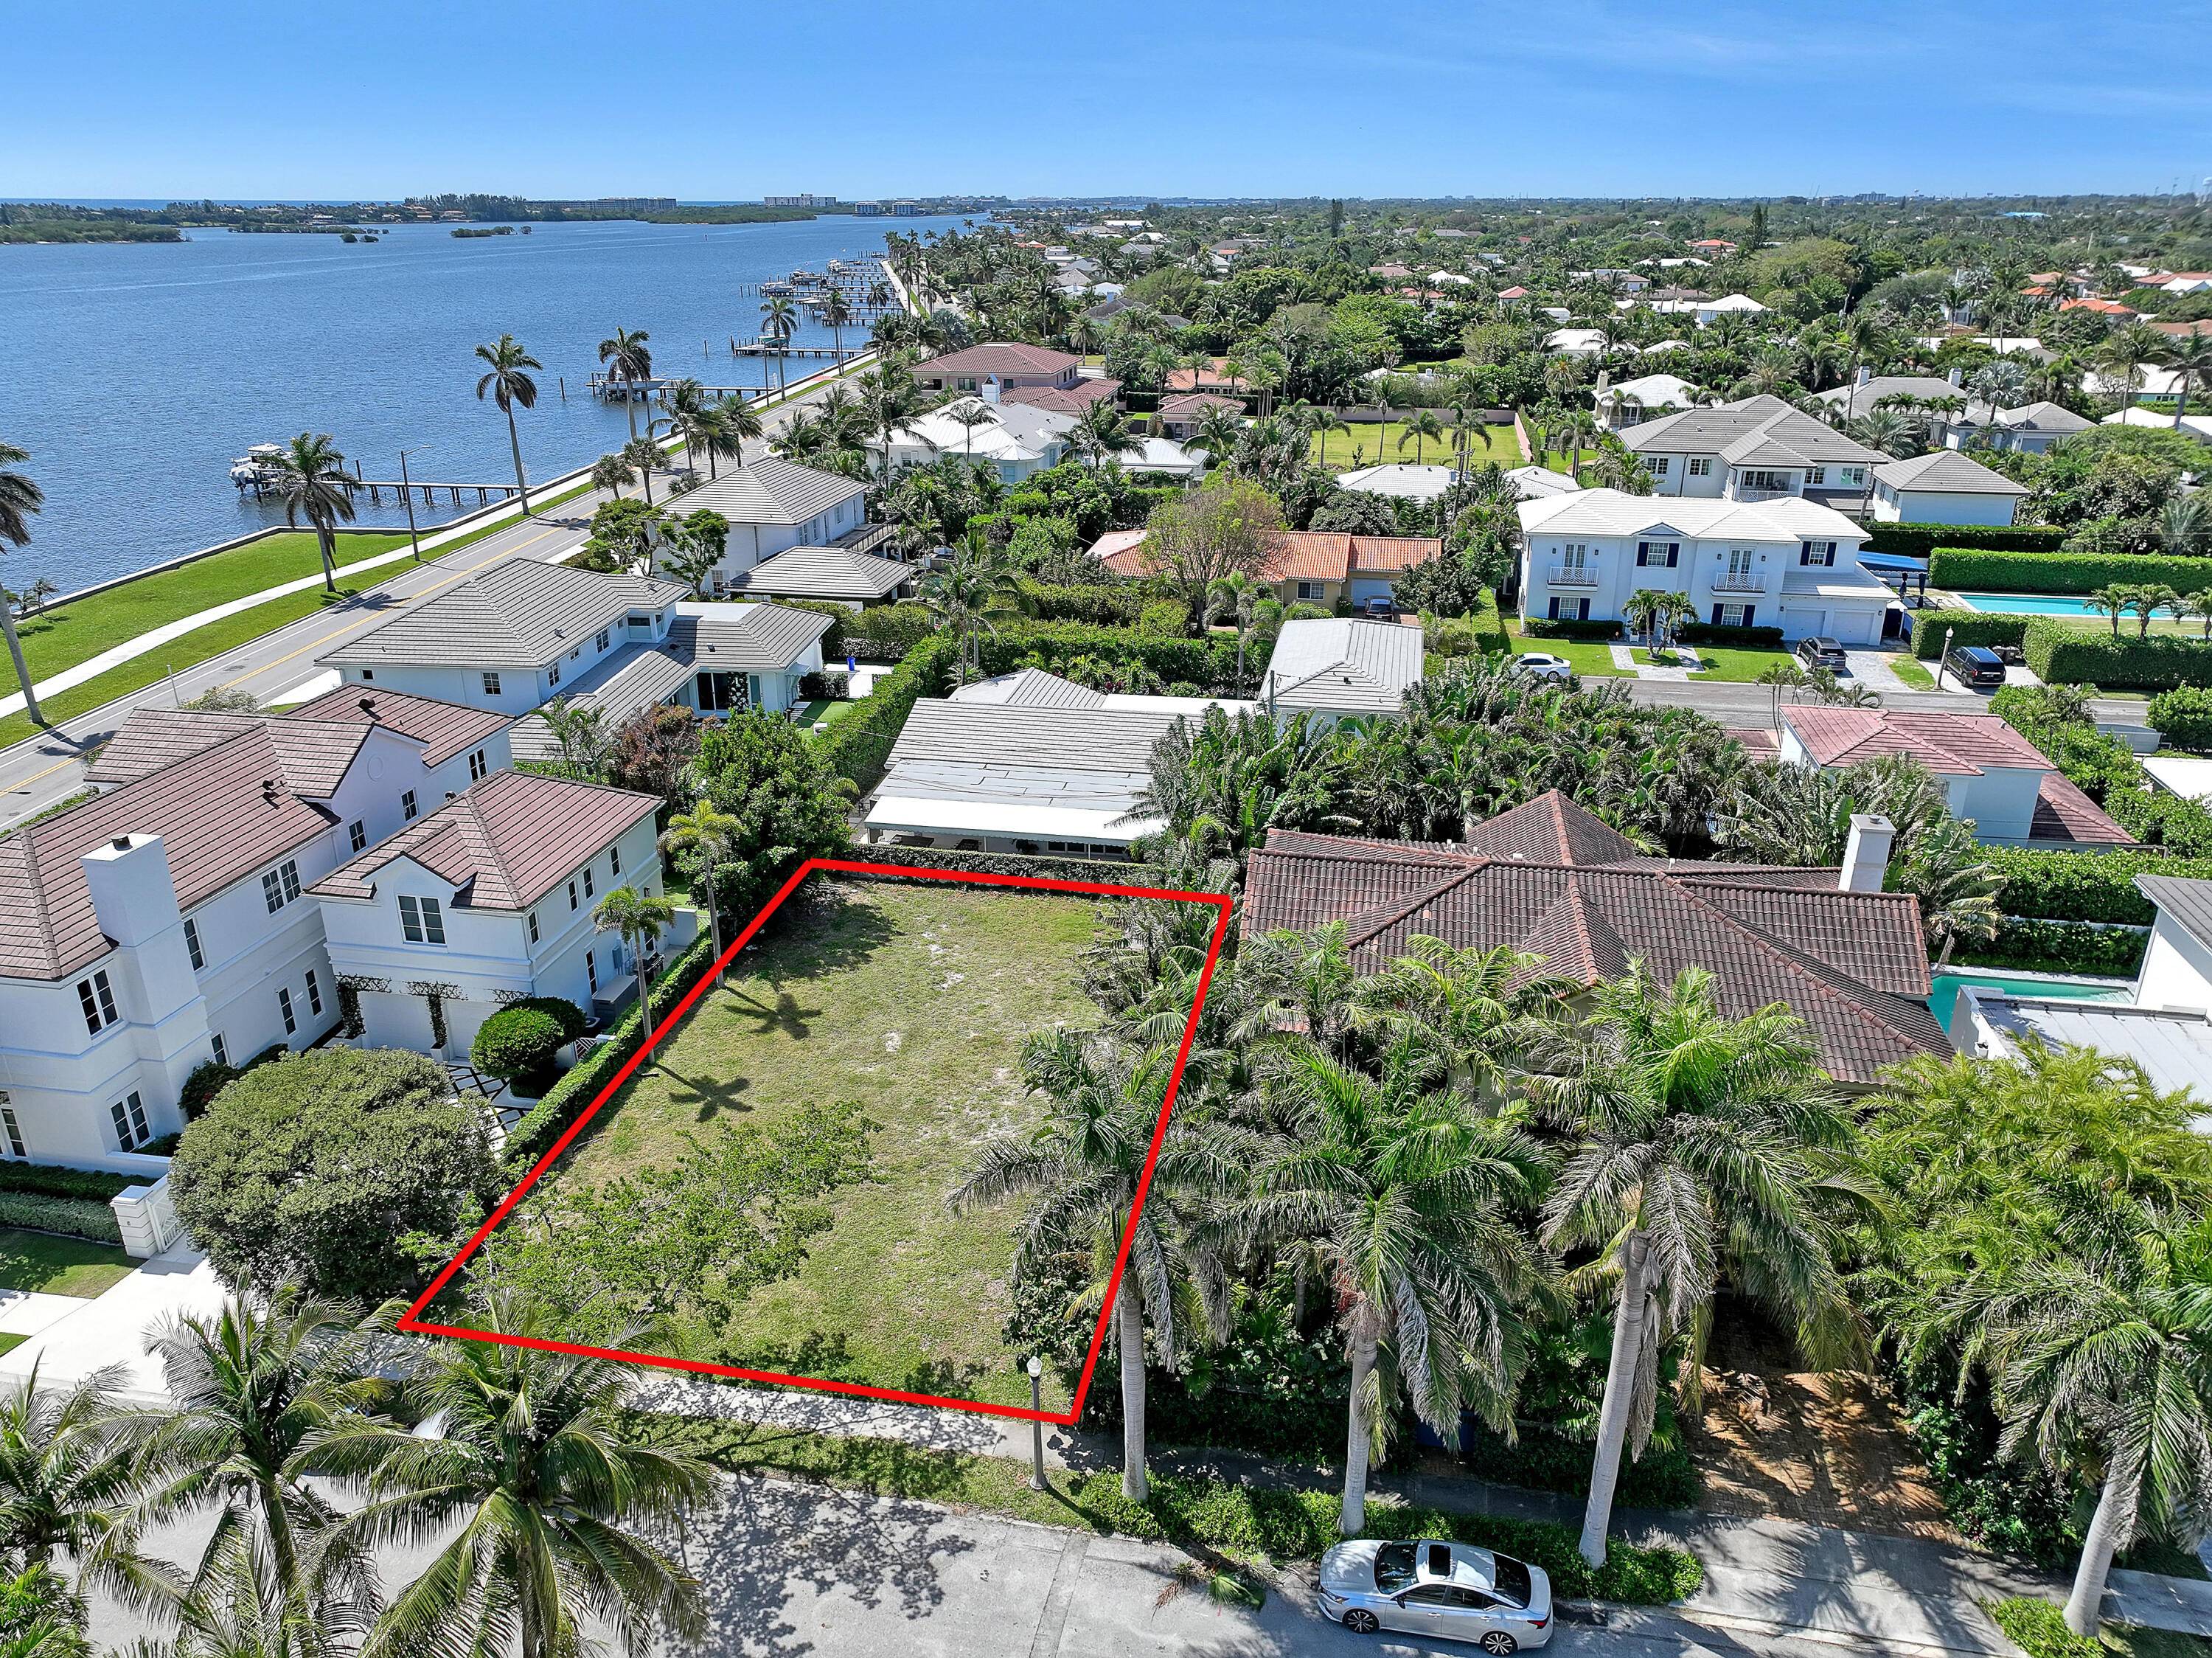 127775 ; Introducing an Exclusive Opportunity in West Palm Beach 127775 ; BEAUTIFUL VACANT LOT !